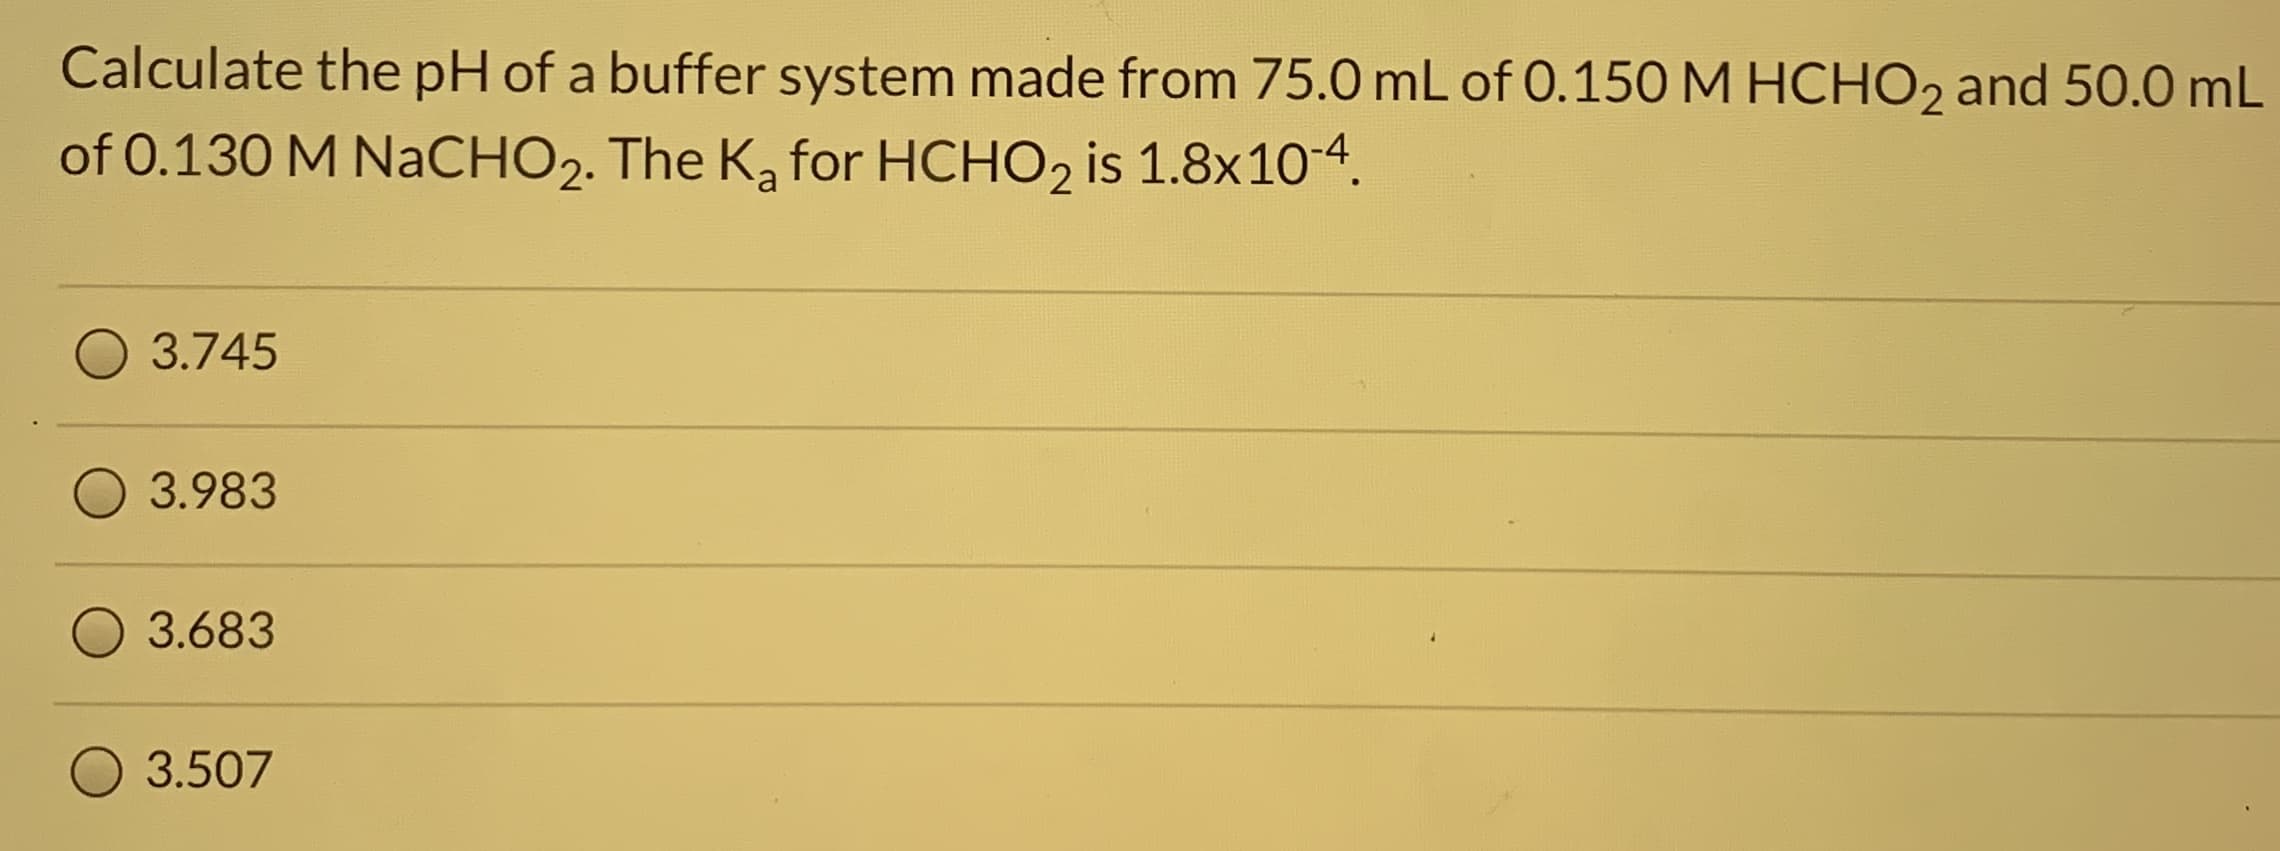 Calculate the pH of a buffer system made from 75.0 mL of 0.150 M HCHO2 and 50.0 mL
of 0.130 M NaCHO2. The K, for HCHO, is 1.8x10-4.
3.745
3.983
3.683
3.507
